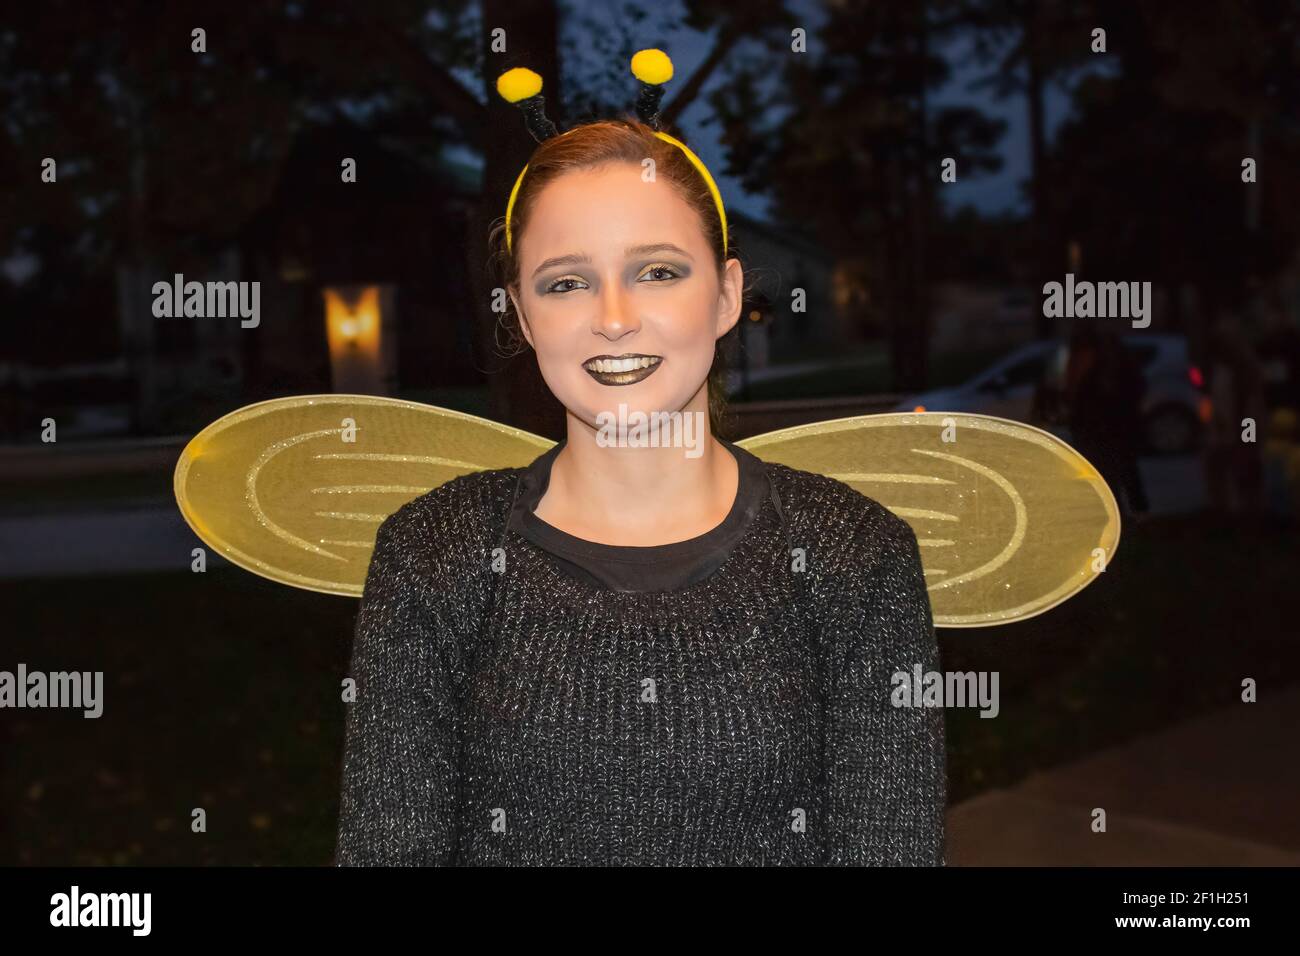 10-31-2018 Tulsa, USA Petty teenaged girl dressed as a bumble bee for Halloween with gold wings and sparkly lipstick out trick or treating at night Stock Photo